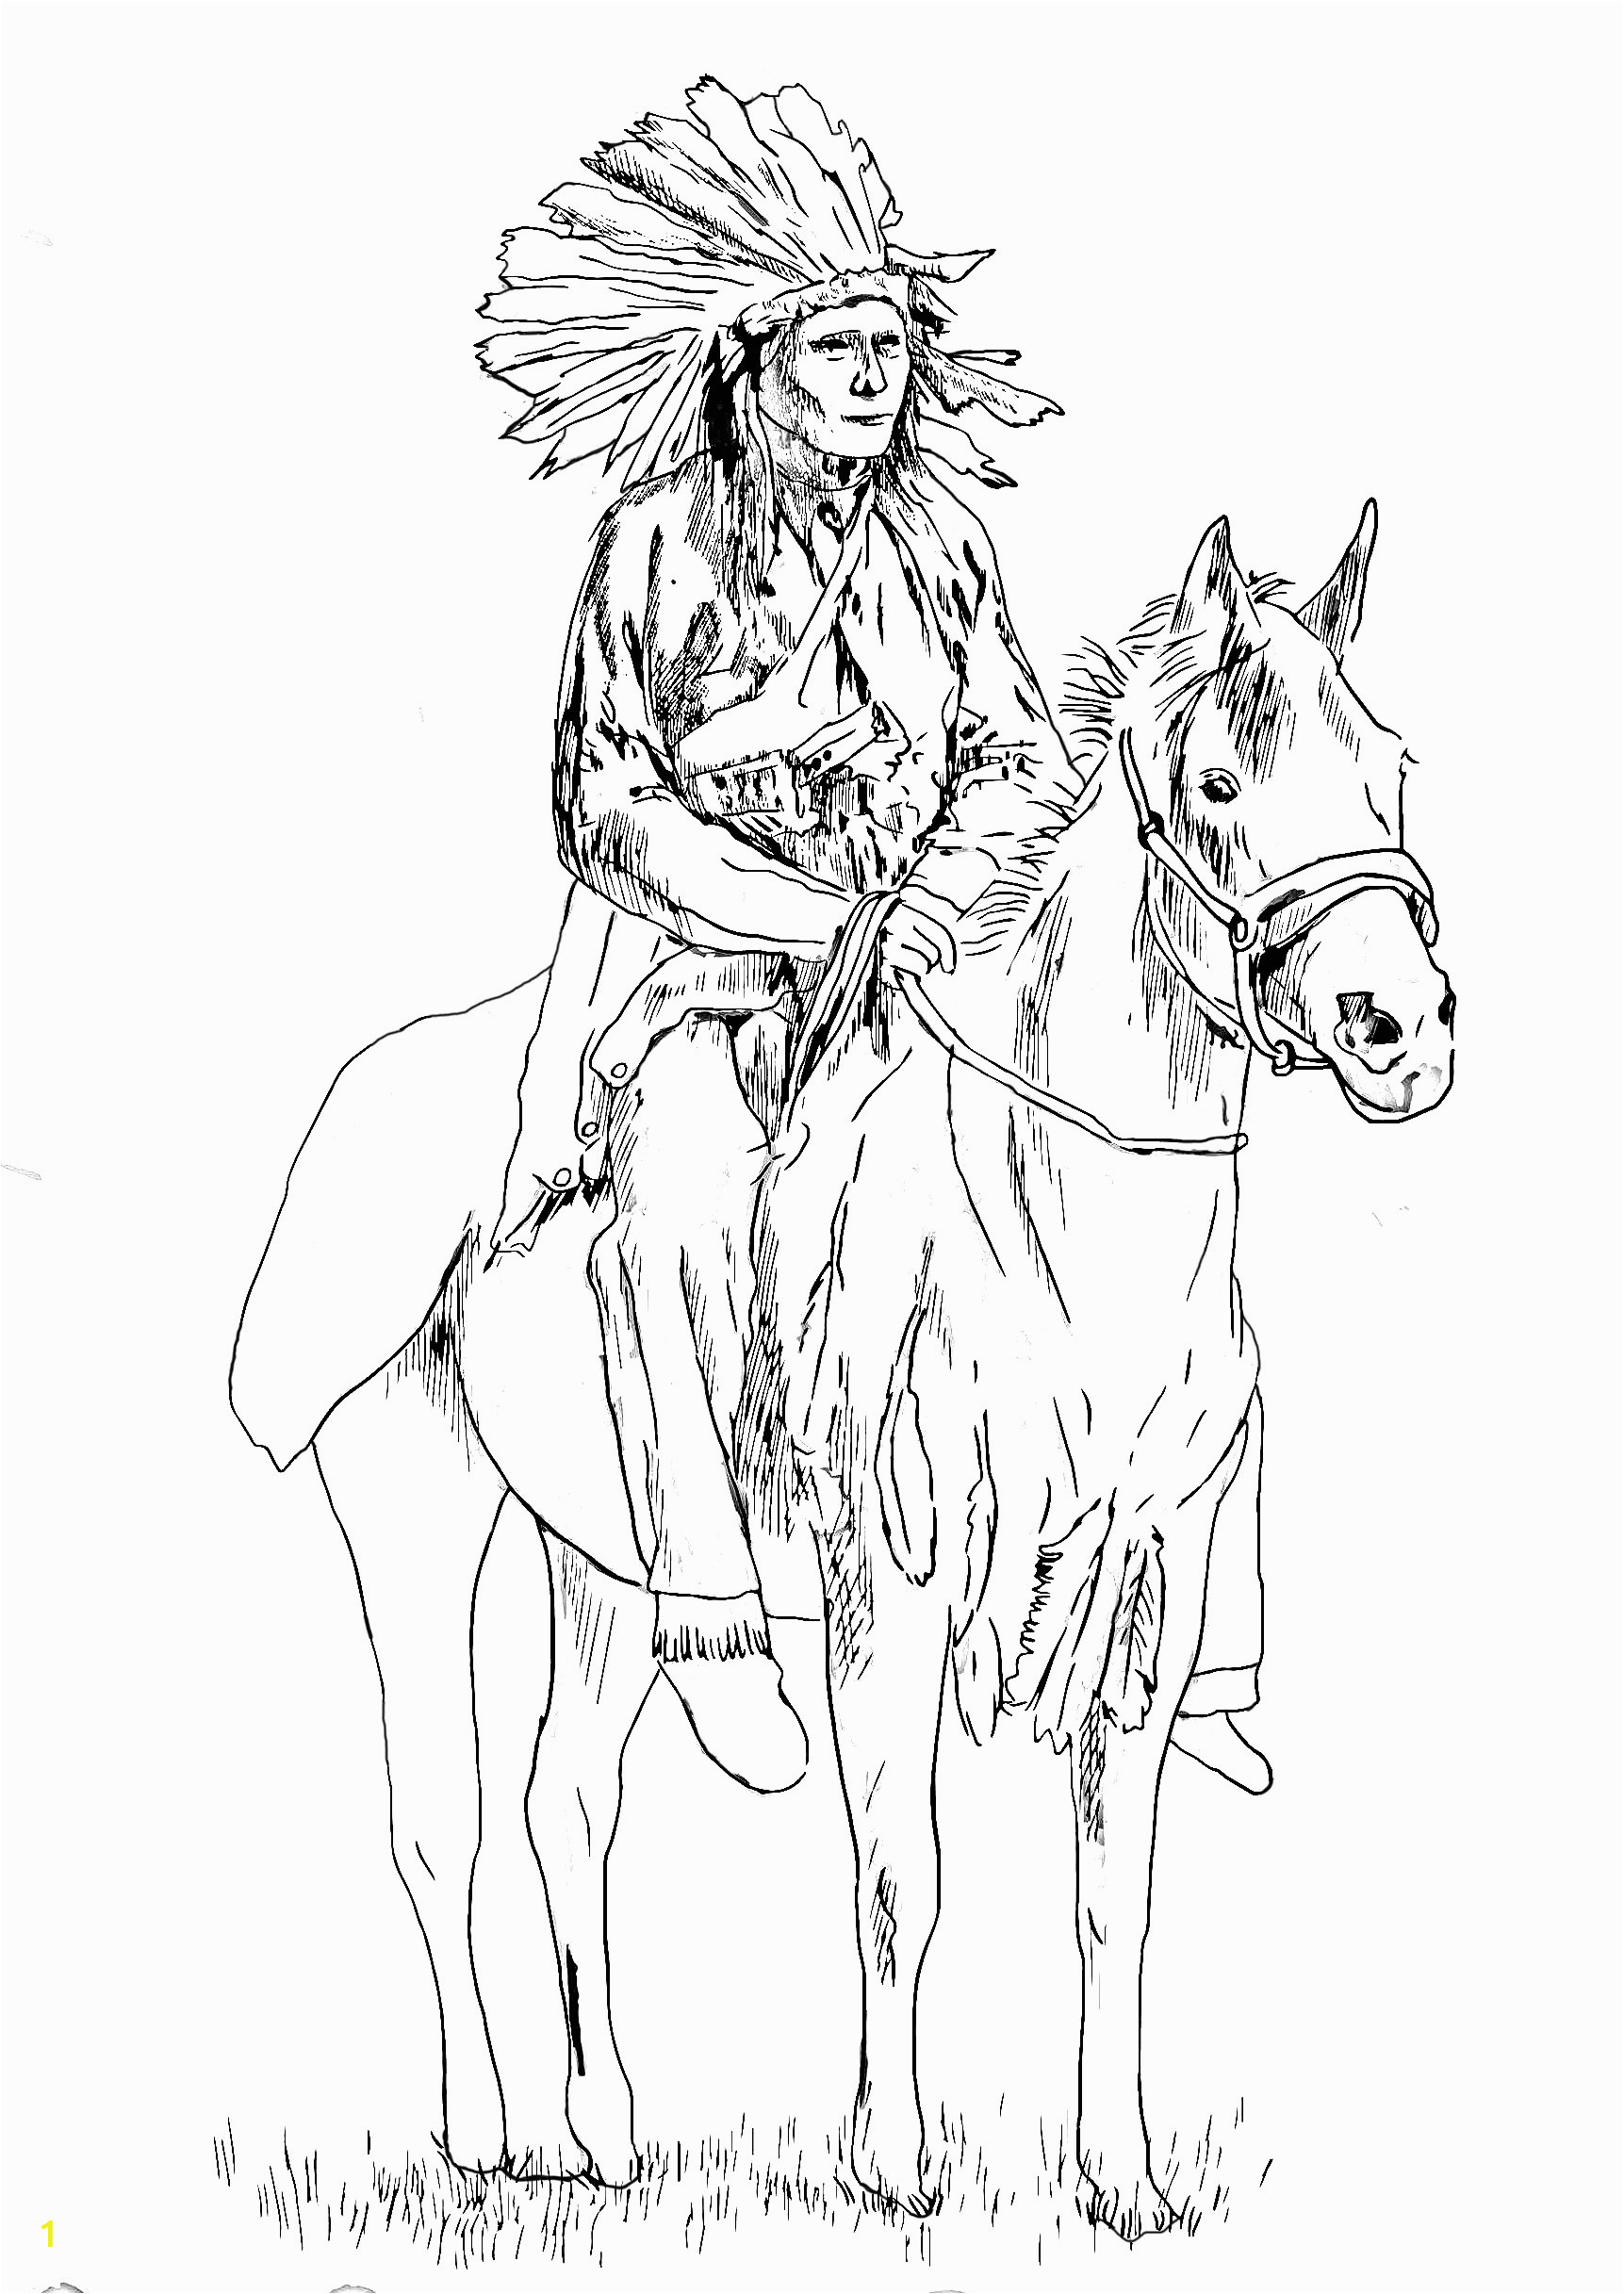 image=native americans coloring adult native american on his horse 1